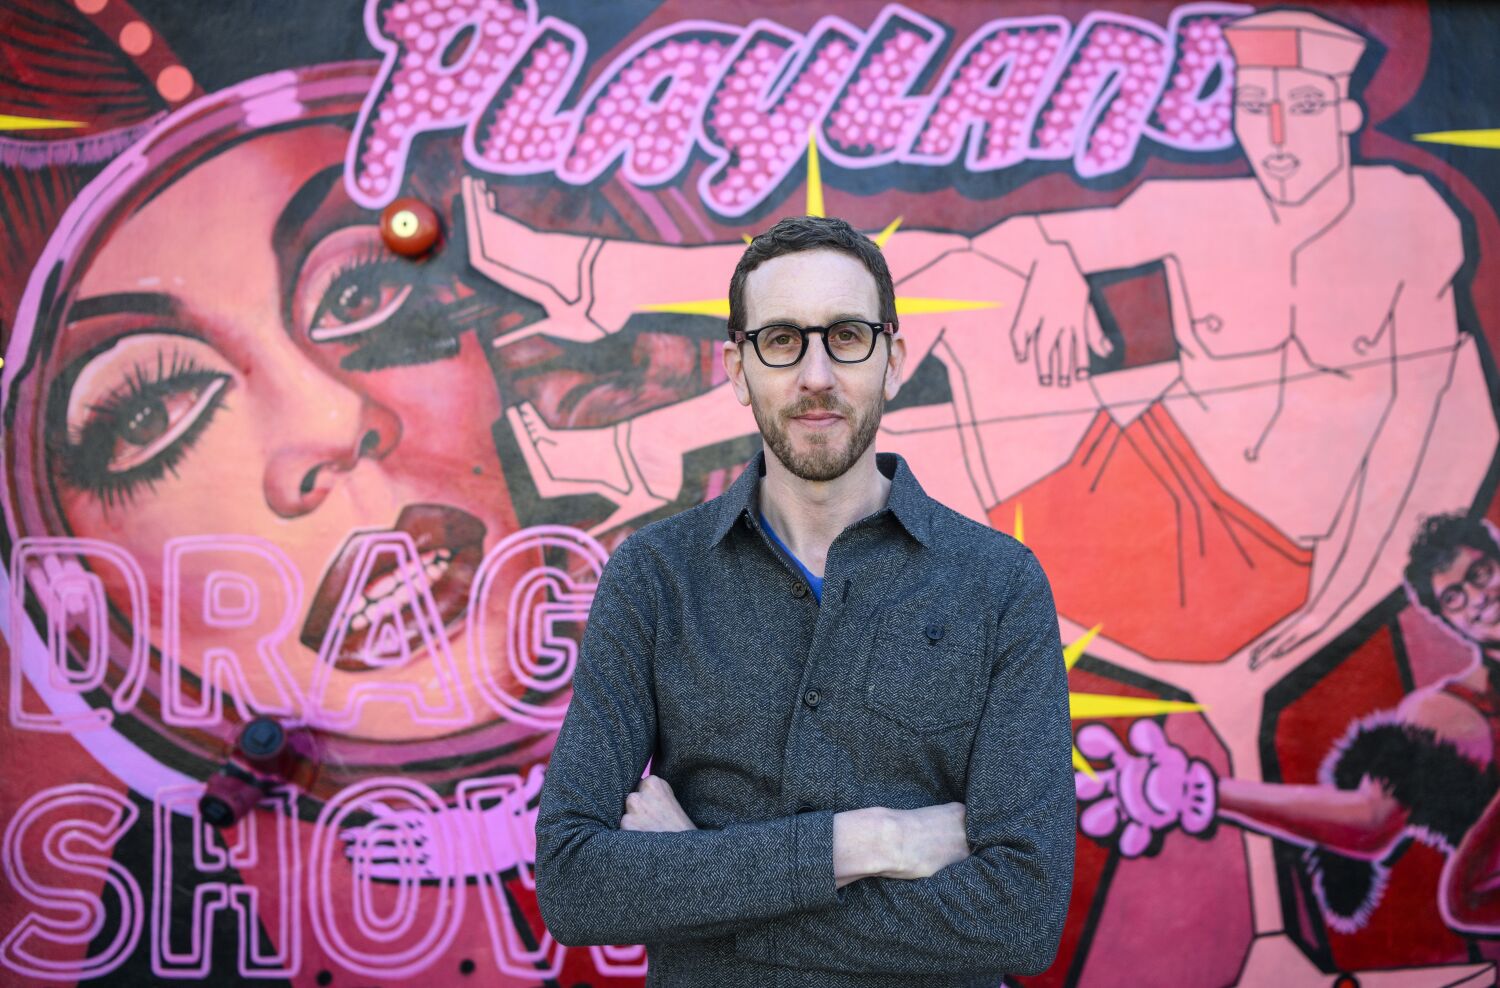 Loved or hated, lawmaker Scott Wiener is a lightning rod who could make history